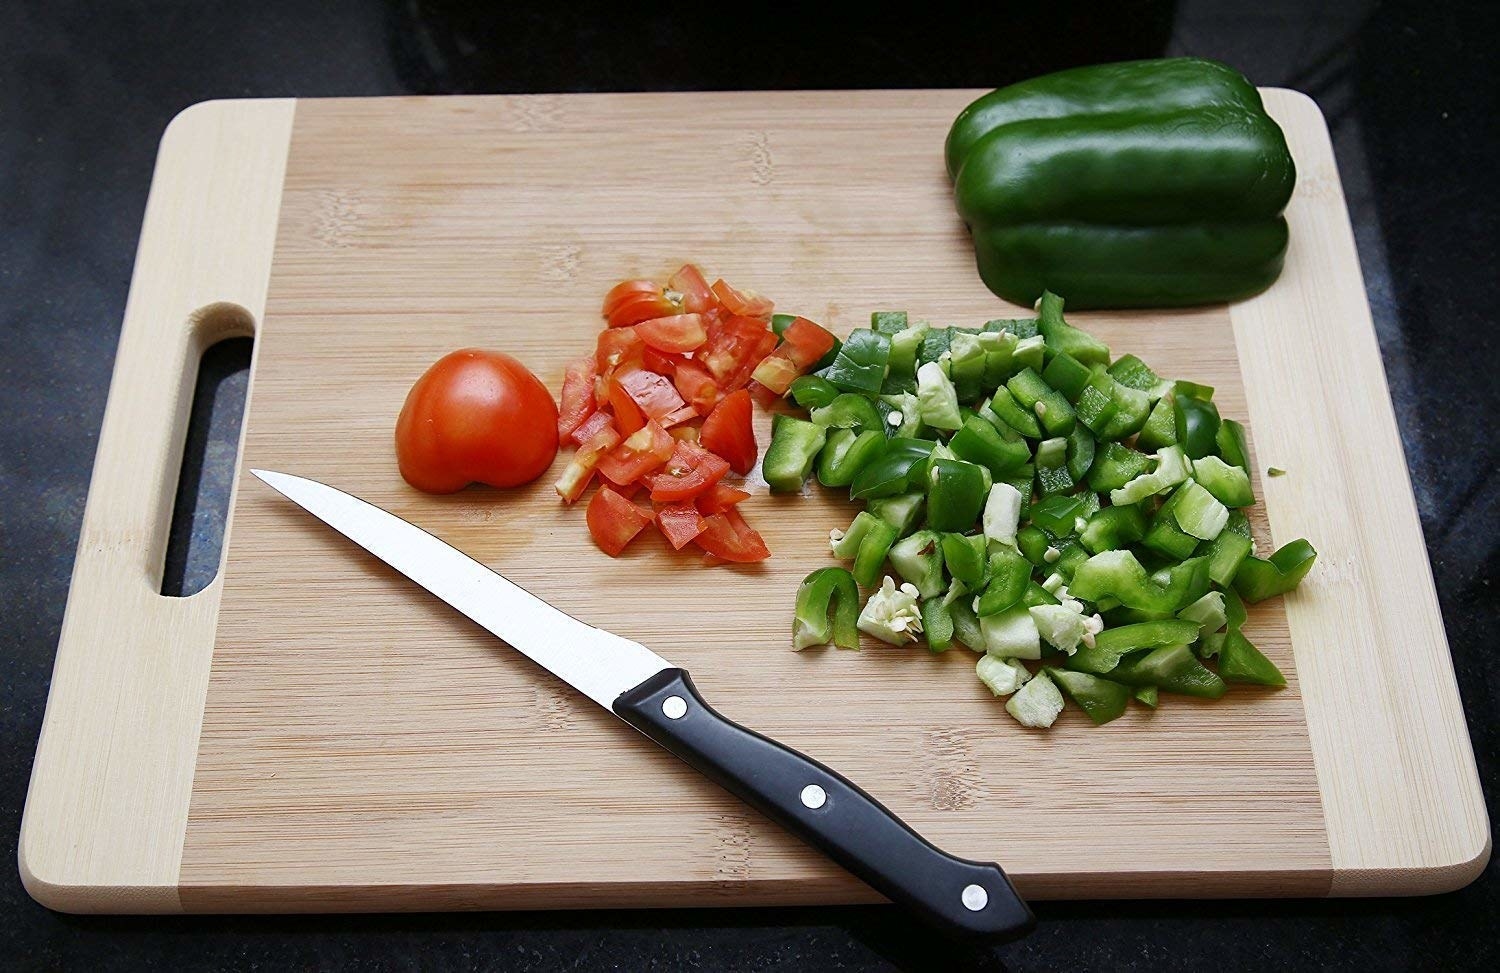 A bamboo chopping board with cut vegetables